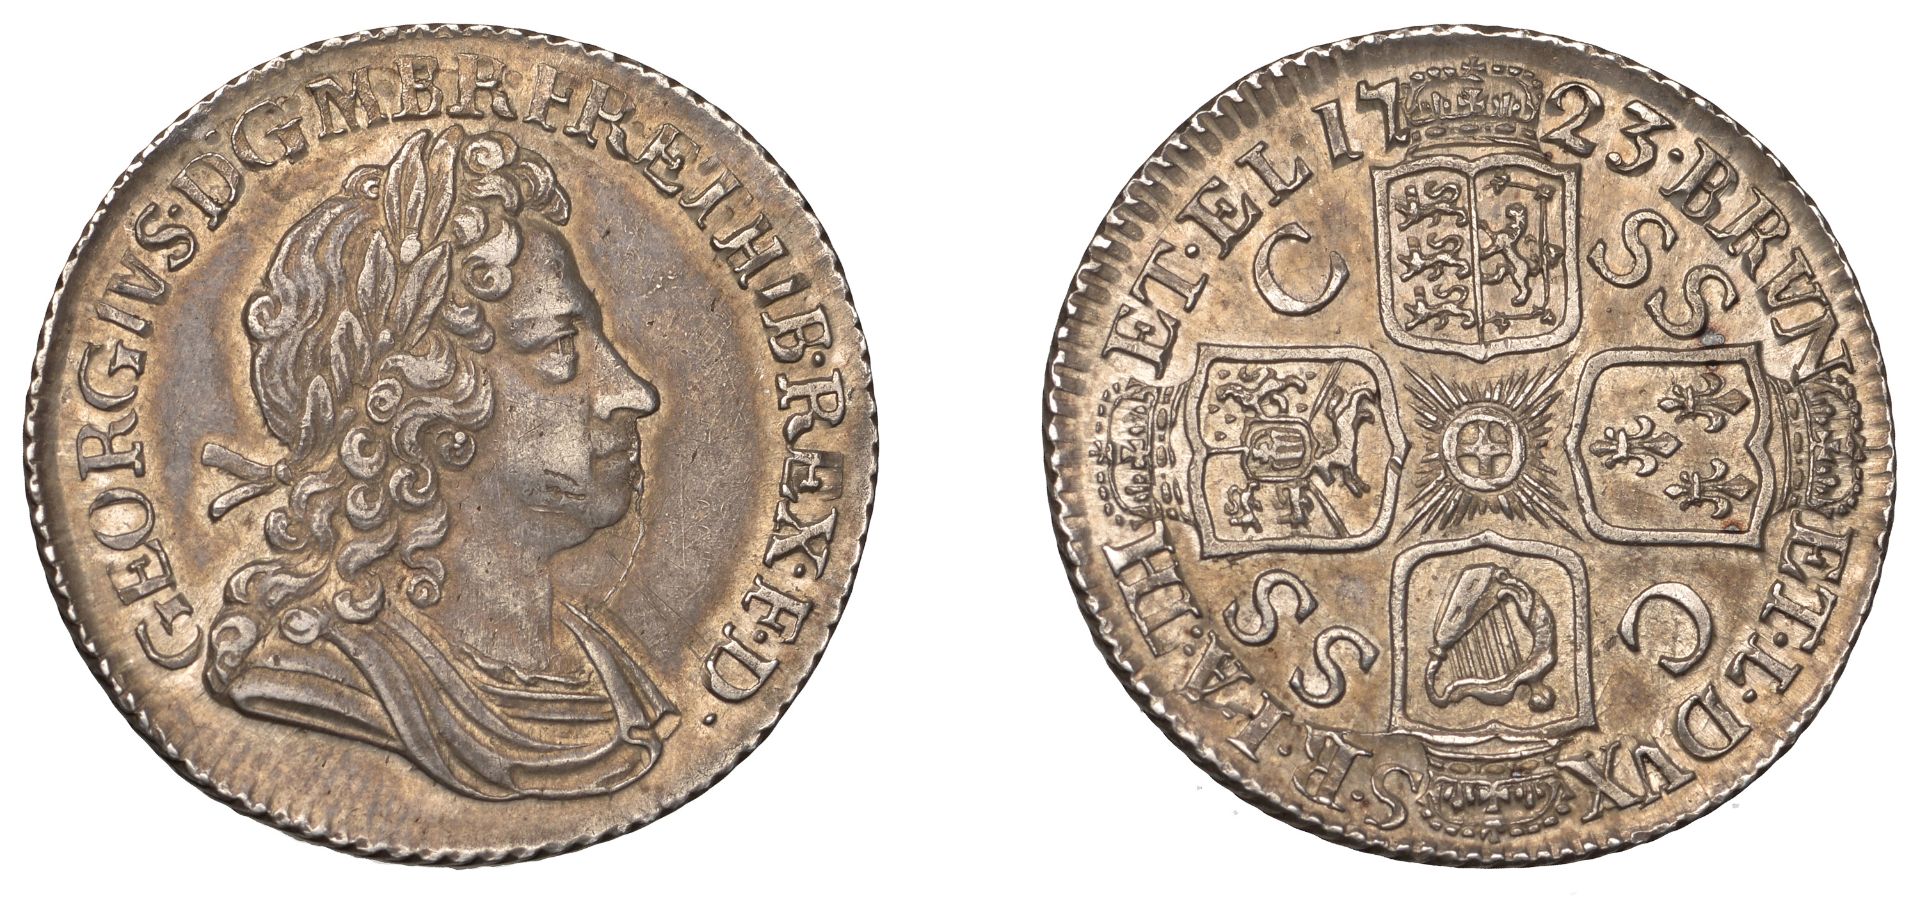 George I (1714-1727), Shilling, 1723 ssc, first bust (ESC 1586; S 3647). About extremely fin...